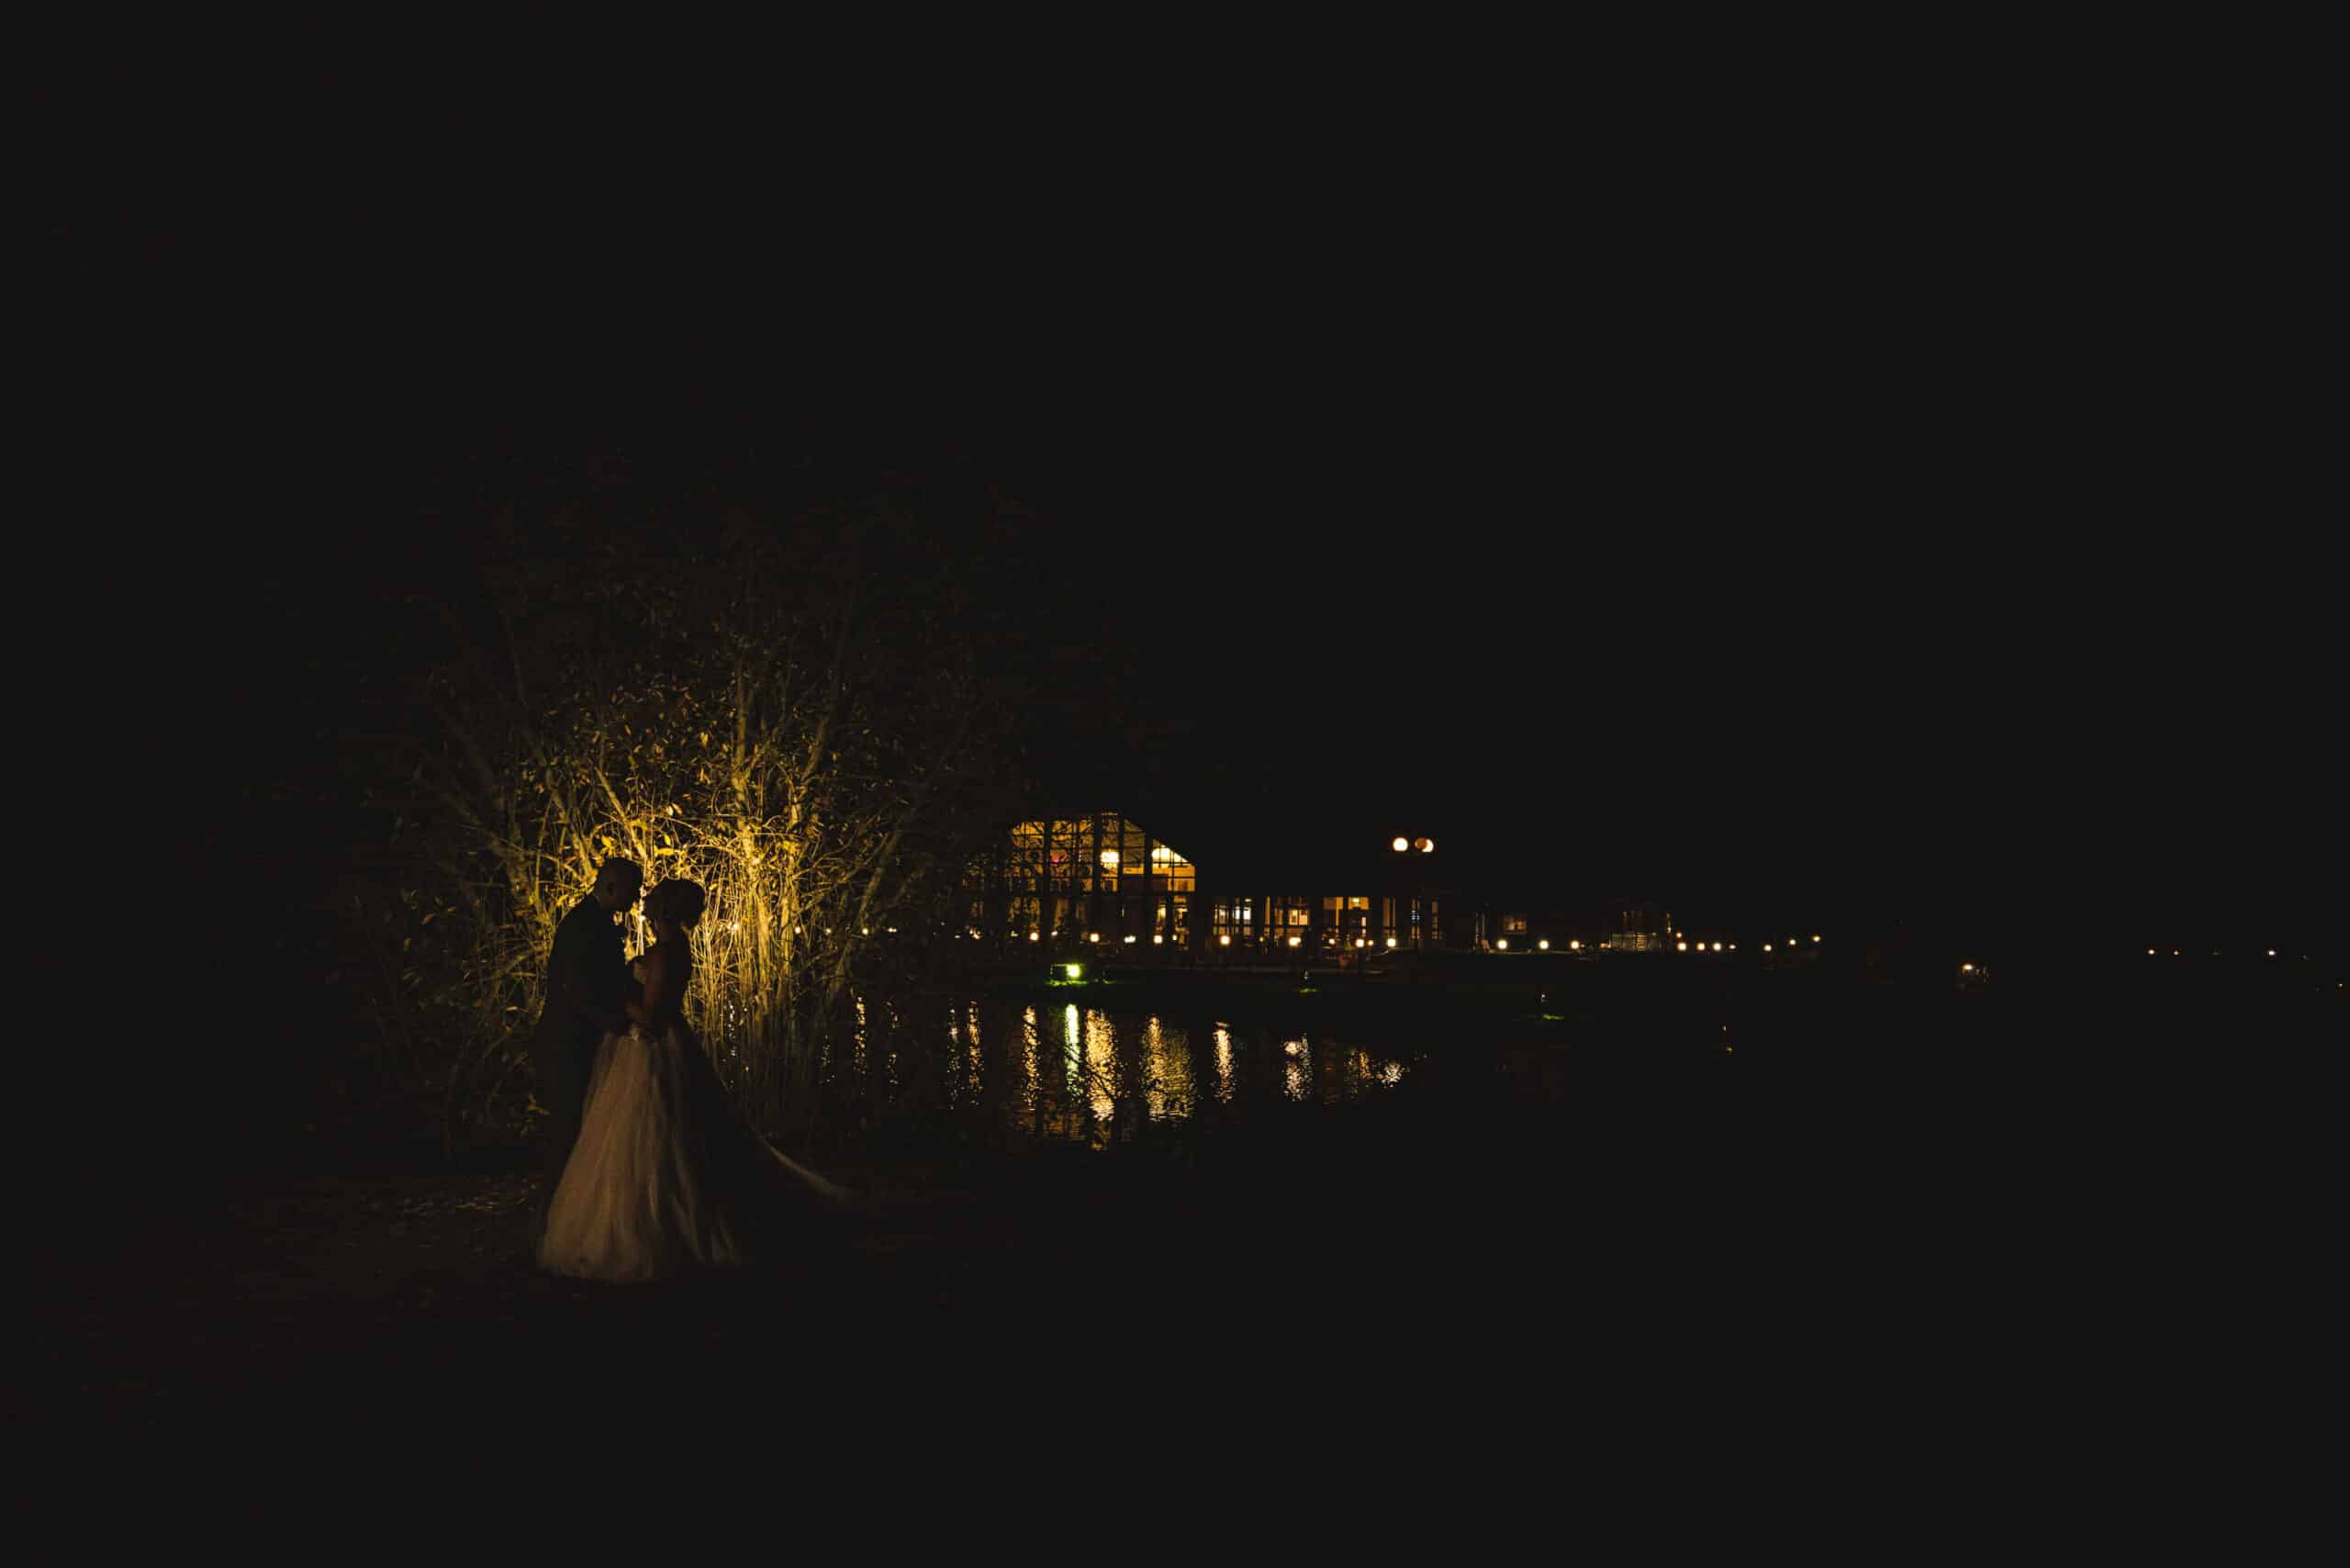 Bride and groom silhouette photography on grounds of Weald of Kent wedding venue